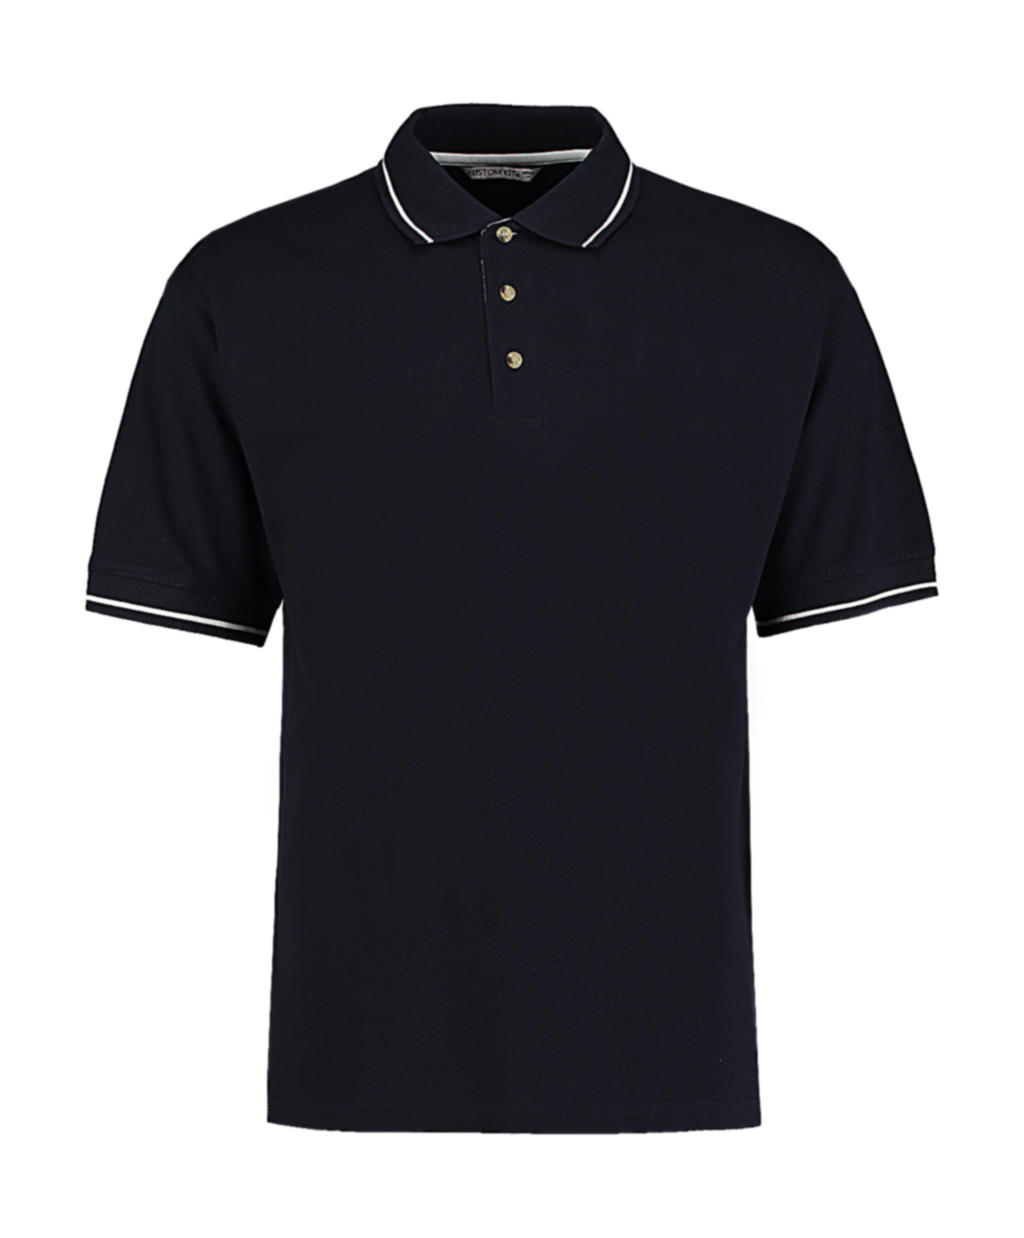  Mens Classic Fit St. Mellion Polo in Farbe Navy/White